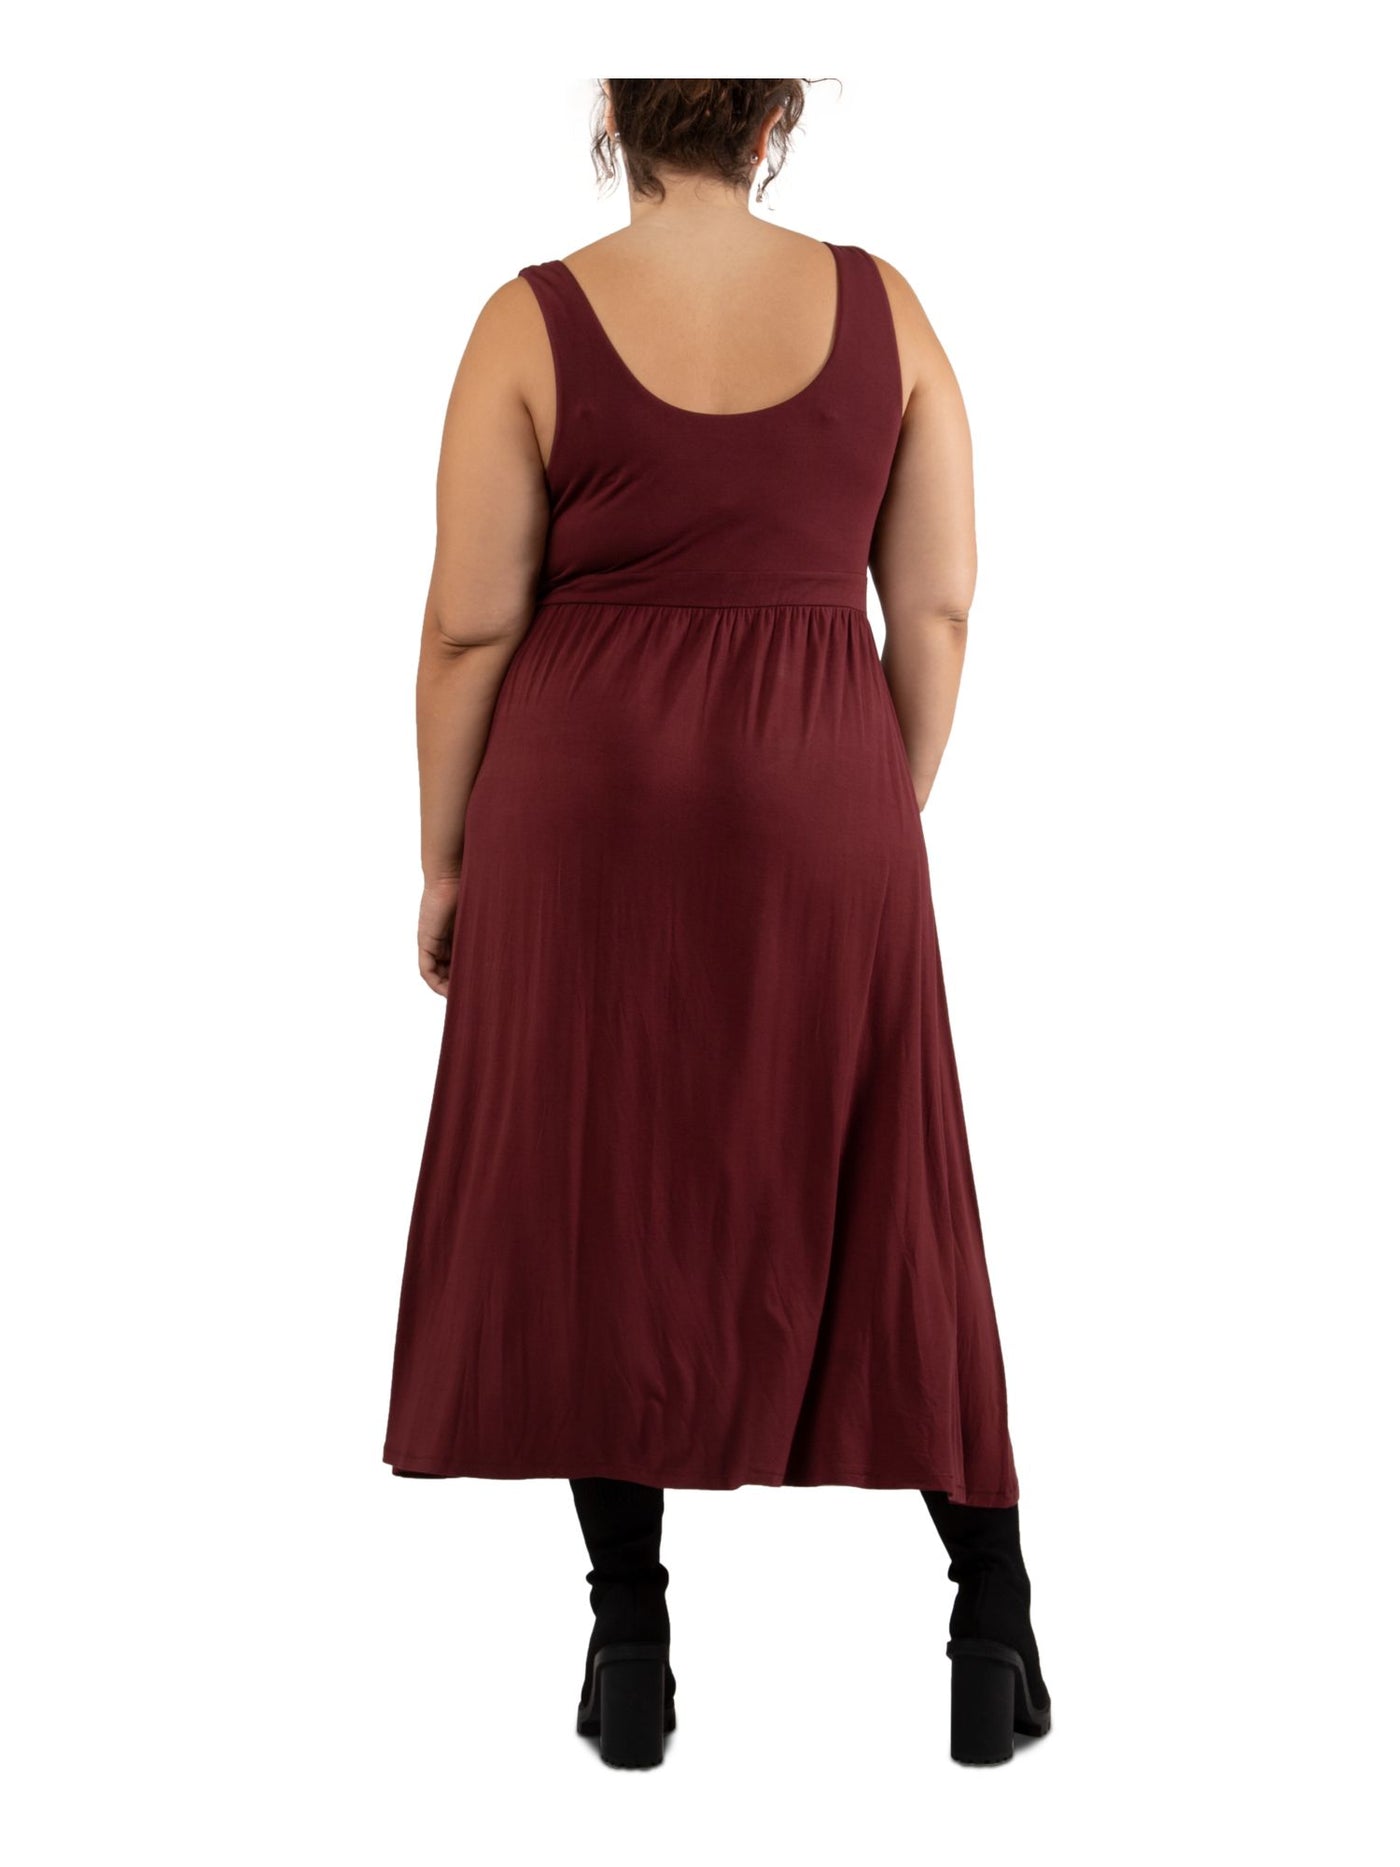 BLACK TAPE Womens Maroon Stretch Slitted Pullover Styling Scoop Back Sleeveless Scoop Neck Midi Fit + Flare Dress Plus 2X